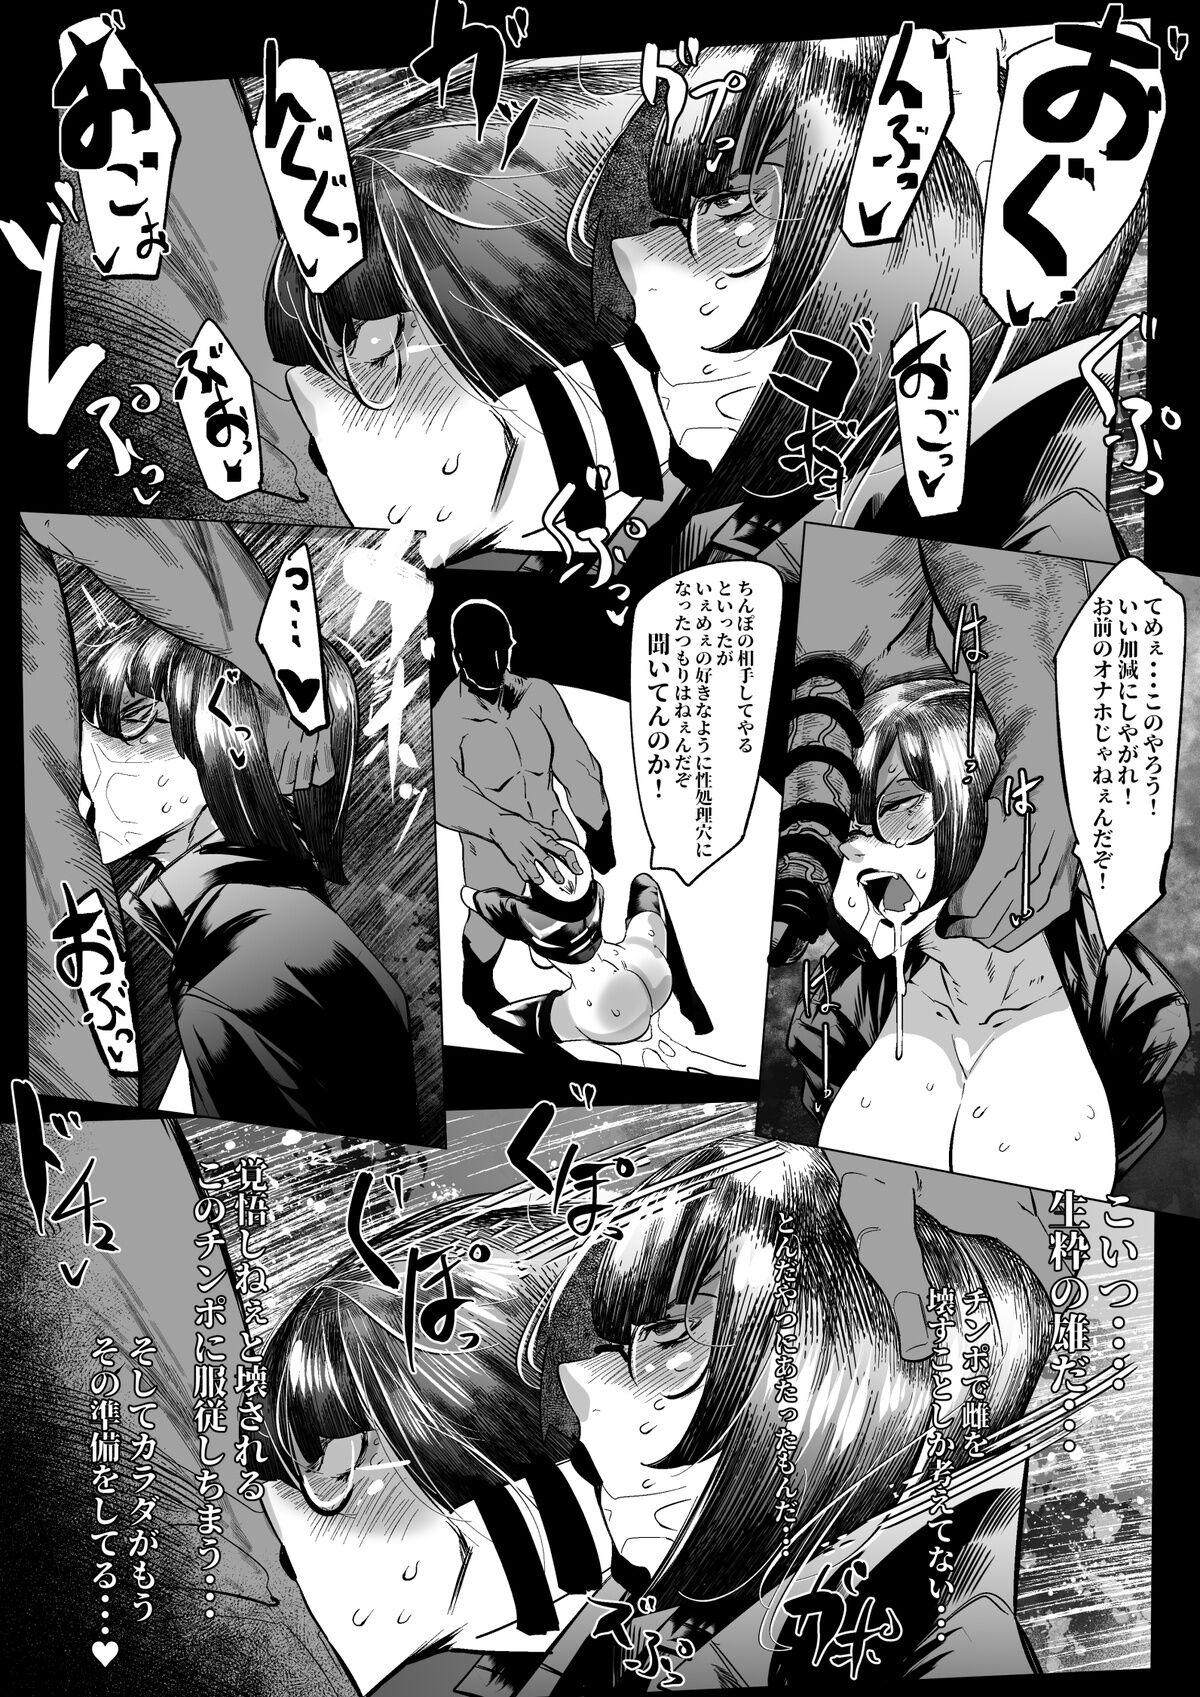 Hotwife I-no can't win in the end no matter what - Guilty gear Missionary Porn - Page 3